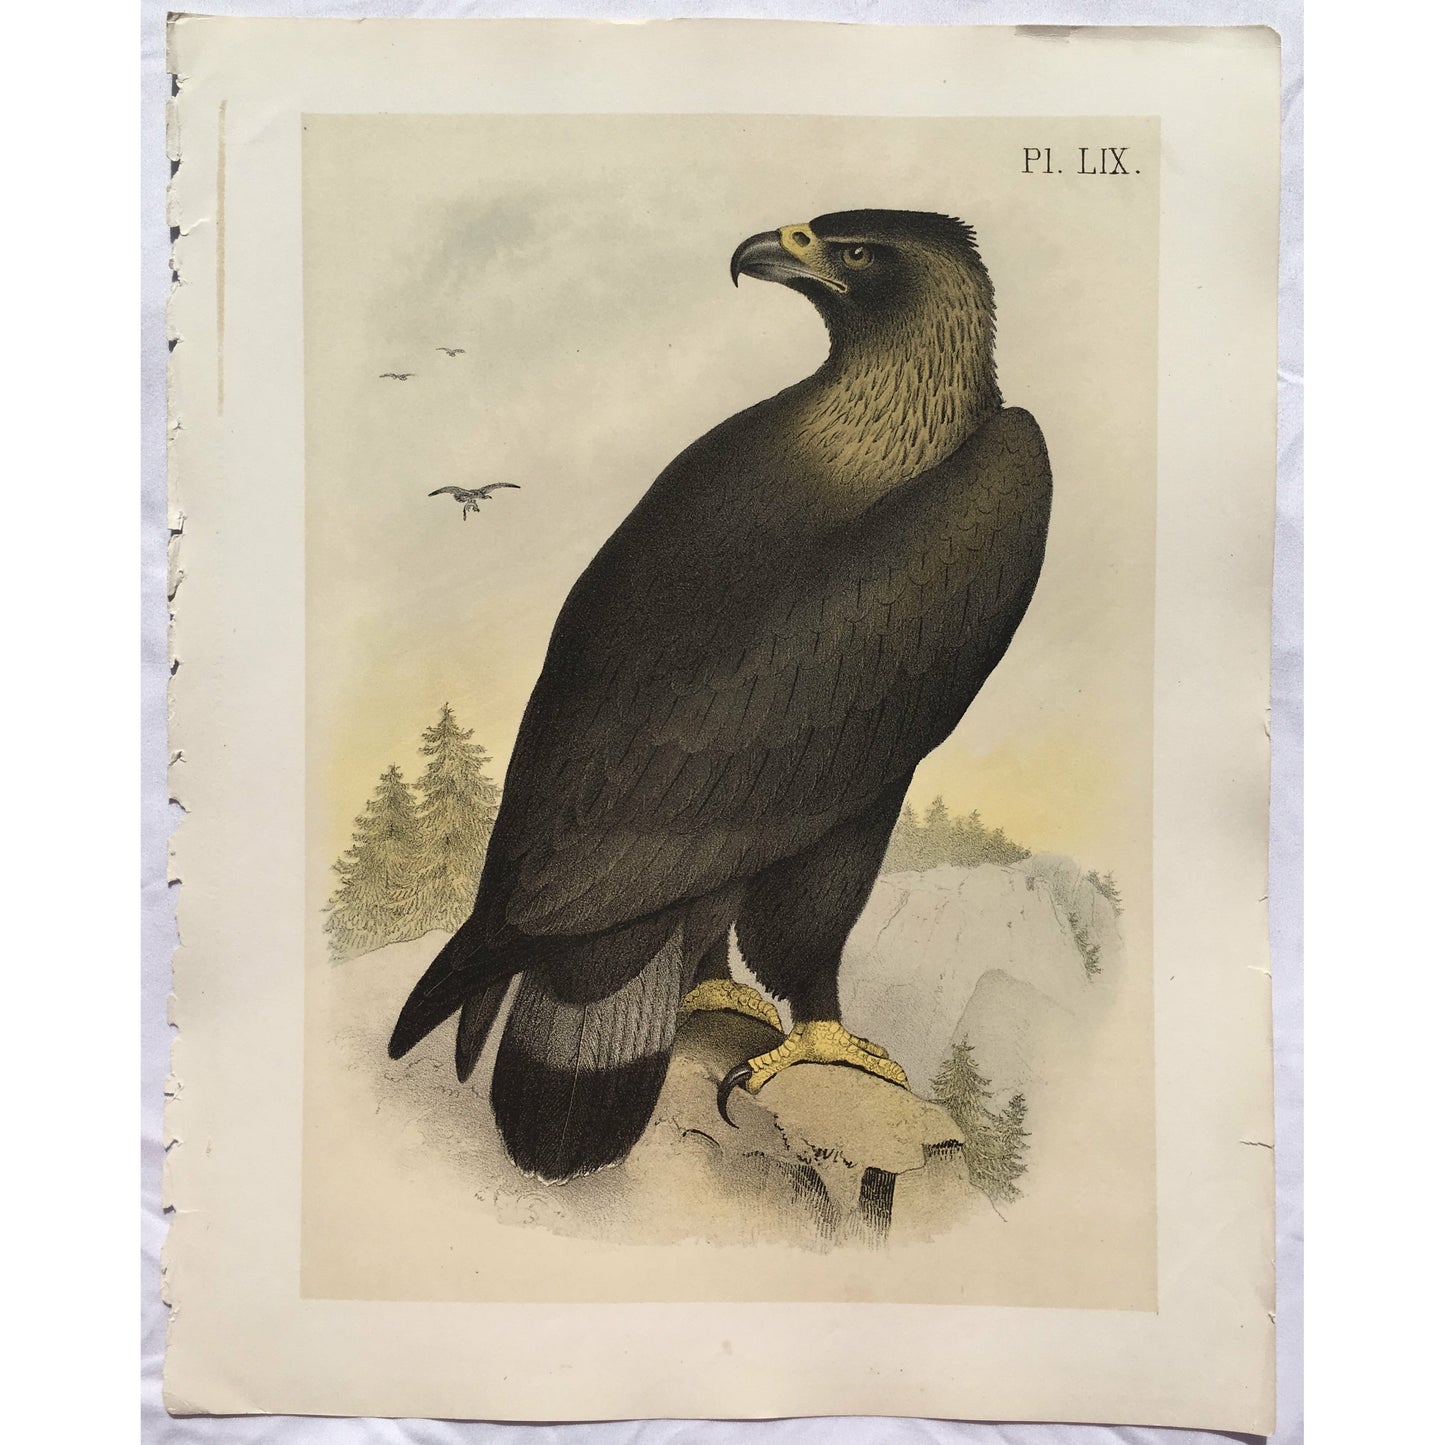 Pl. LIX. (The Golden Eagle - Ring-Tailed Eagle. (Aquila canadensis.))  (B7-D-135)